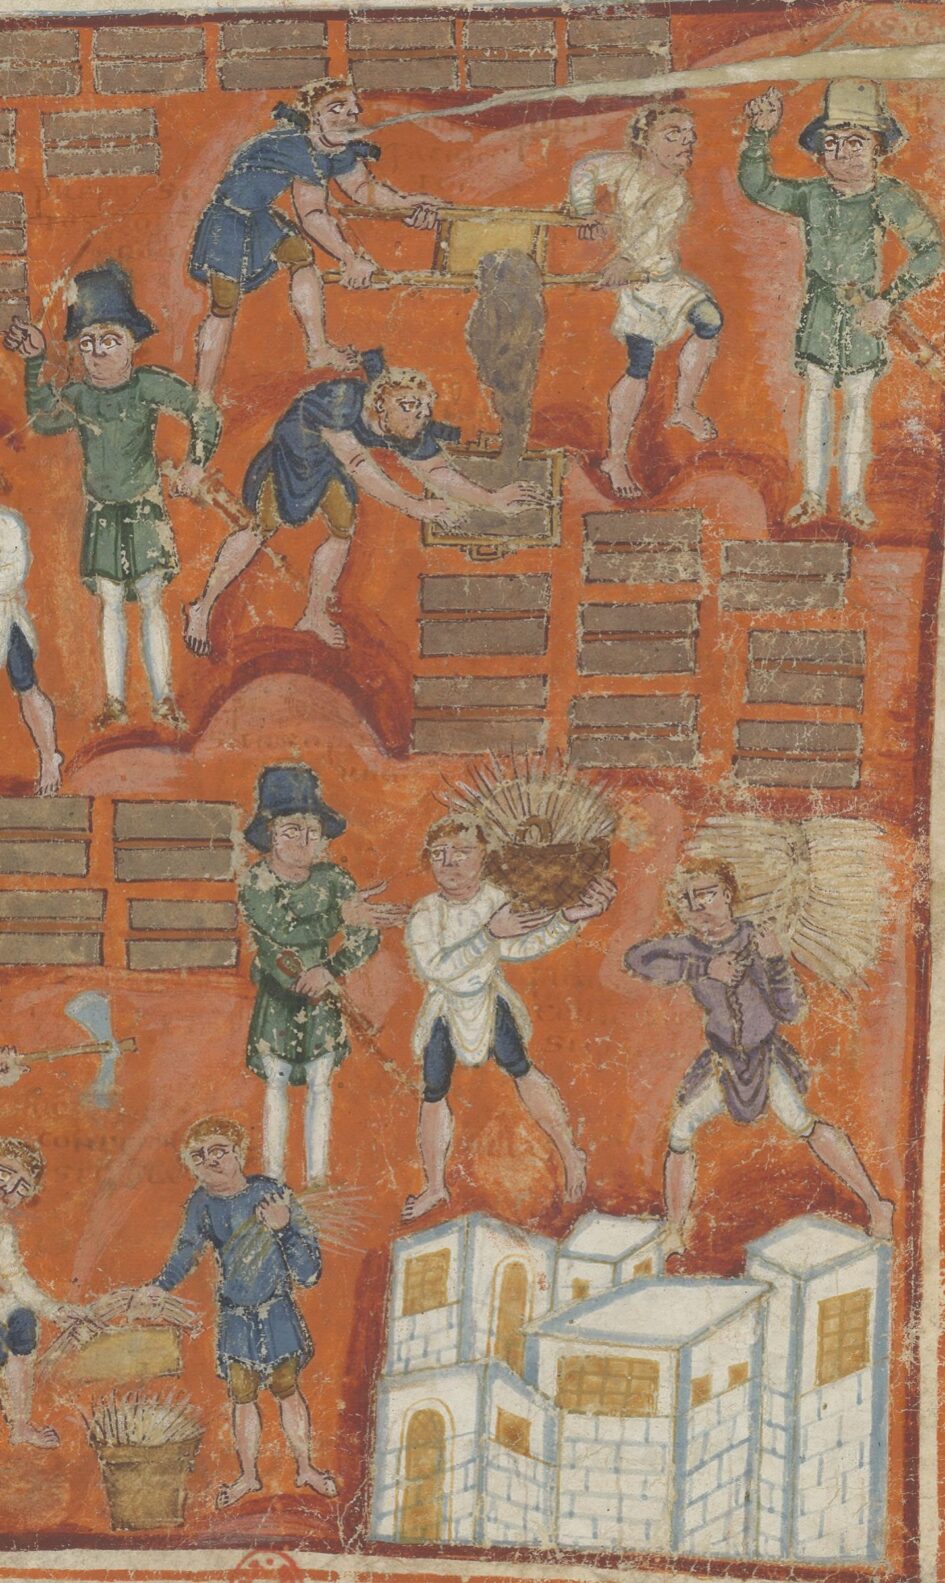 Enslaved Israelites make bricks of clay and straw under the direction of overseers armed with swords and whips.